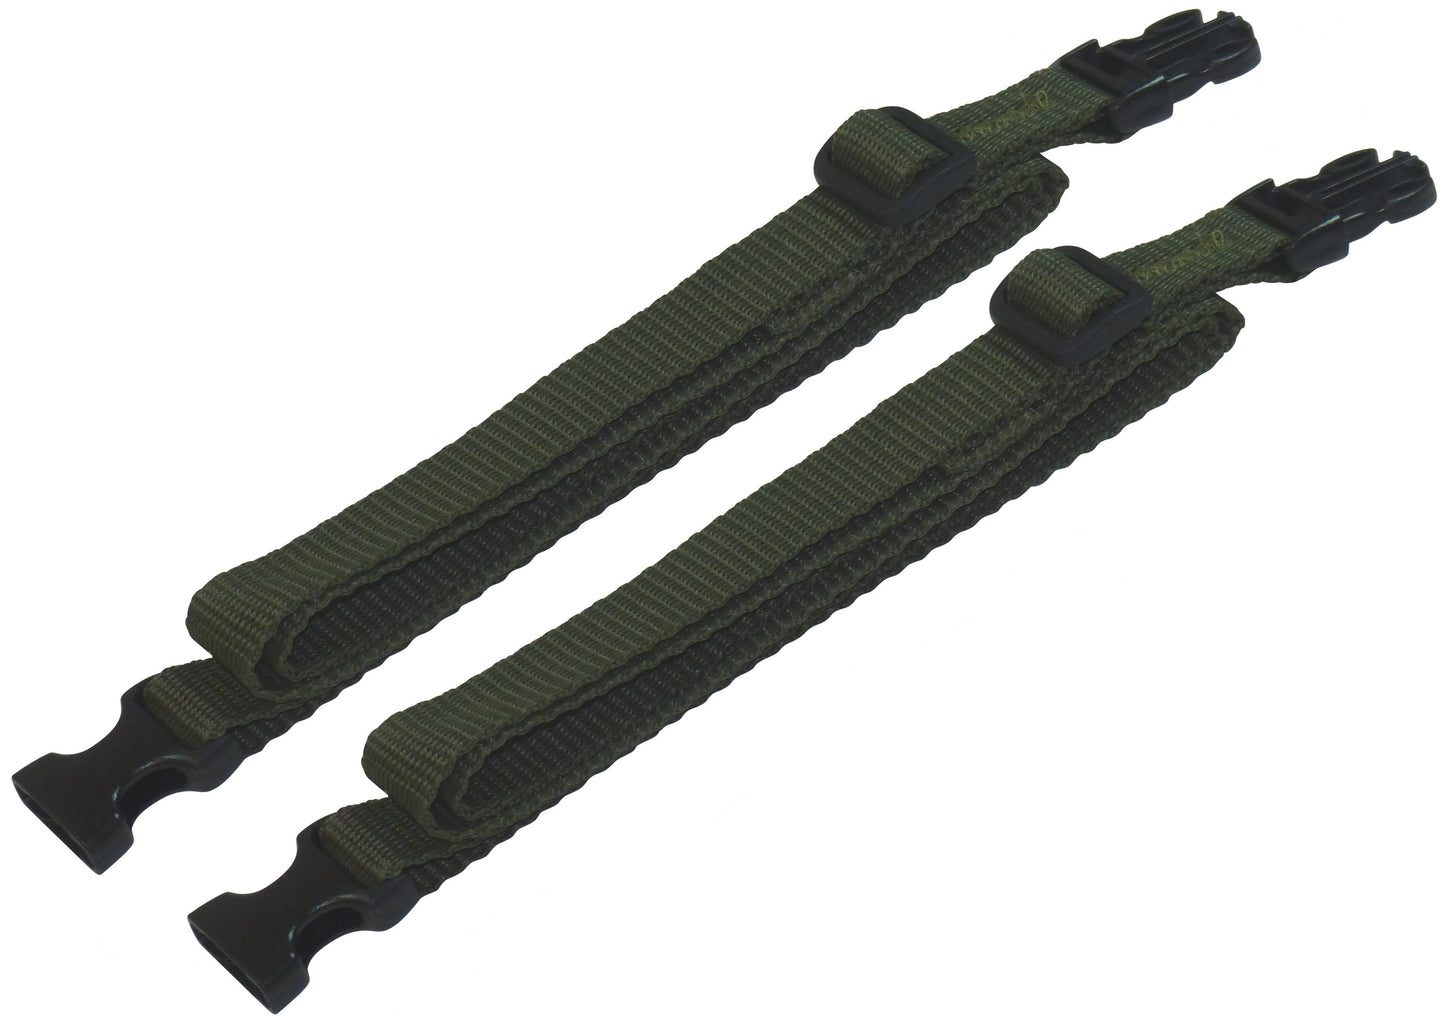 Benristraps 19mm Webbing Strap with Quick Release & Length-Adjusting Buckles (Pair) in olive